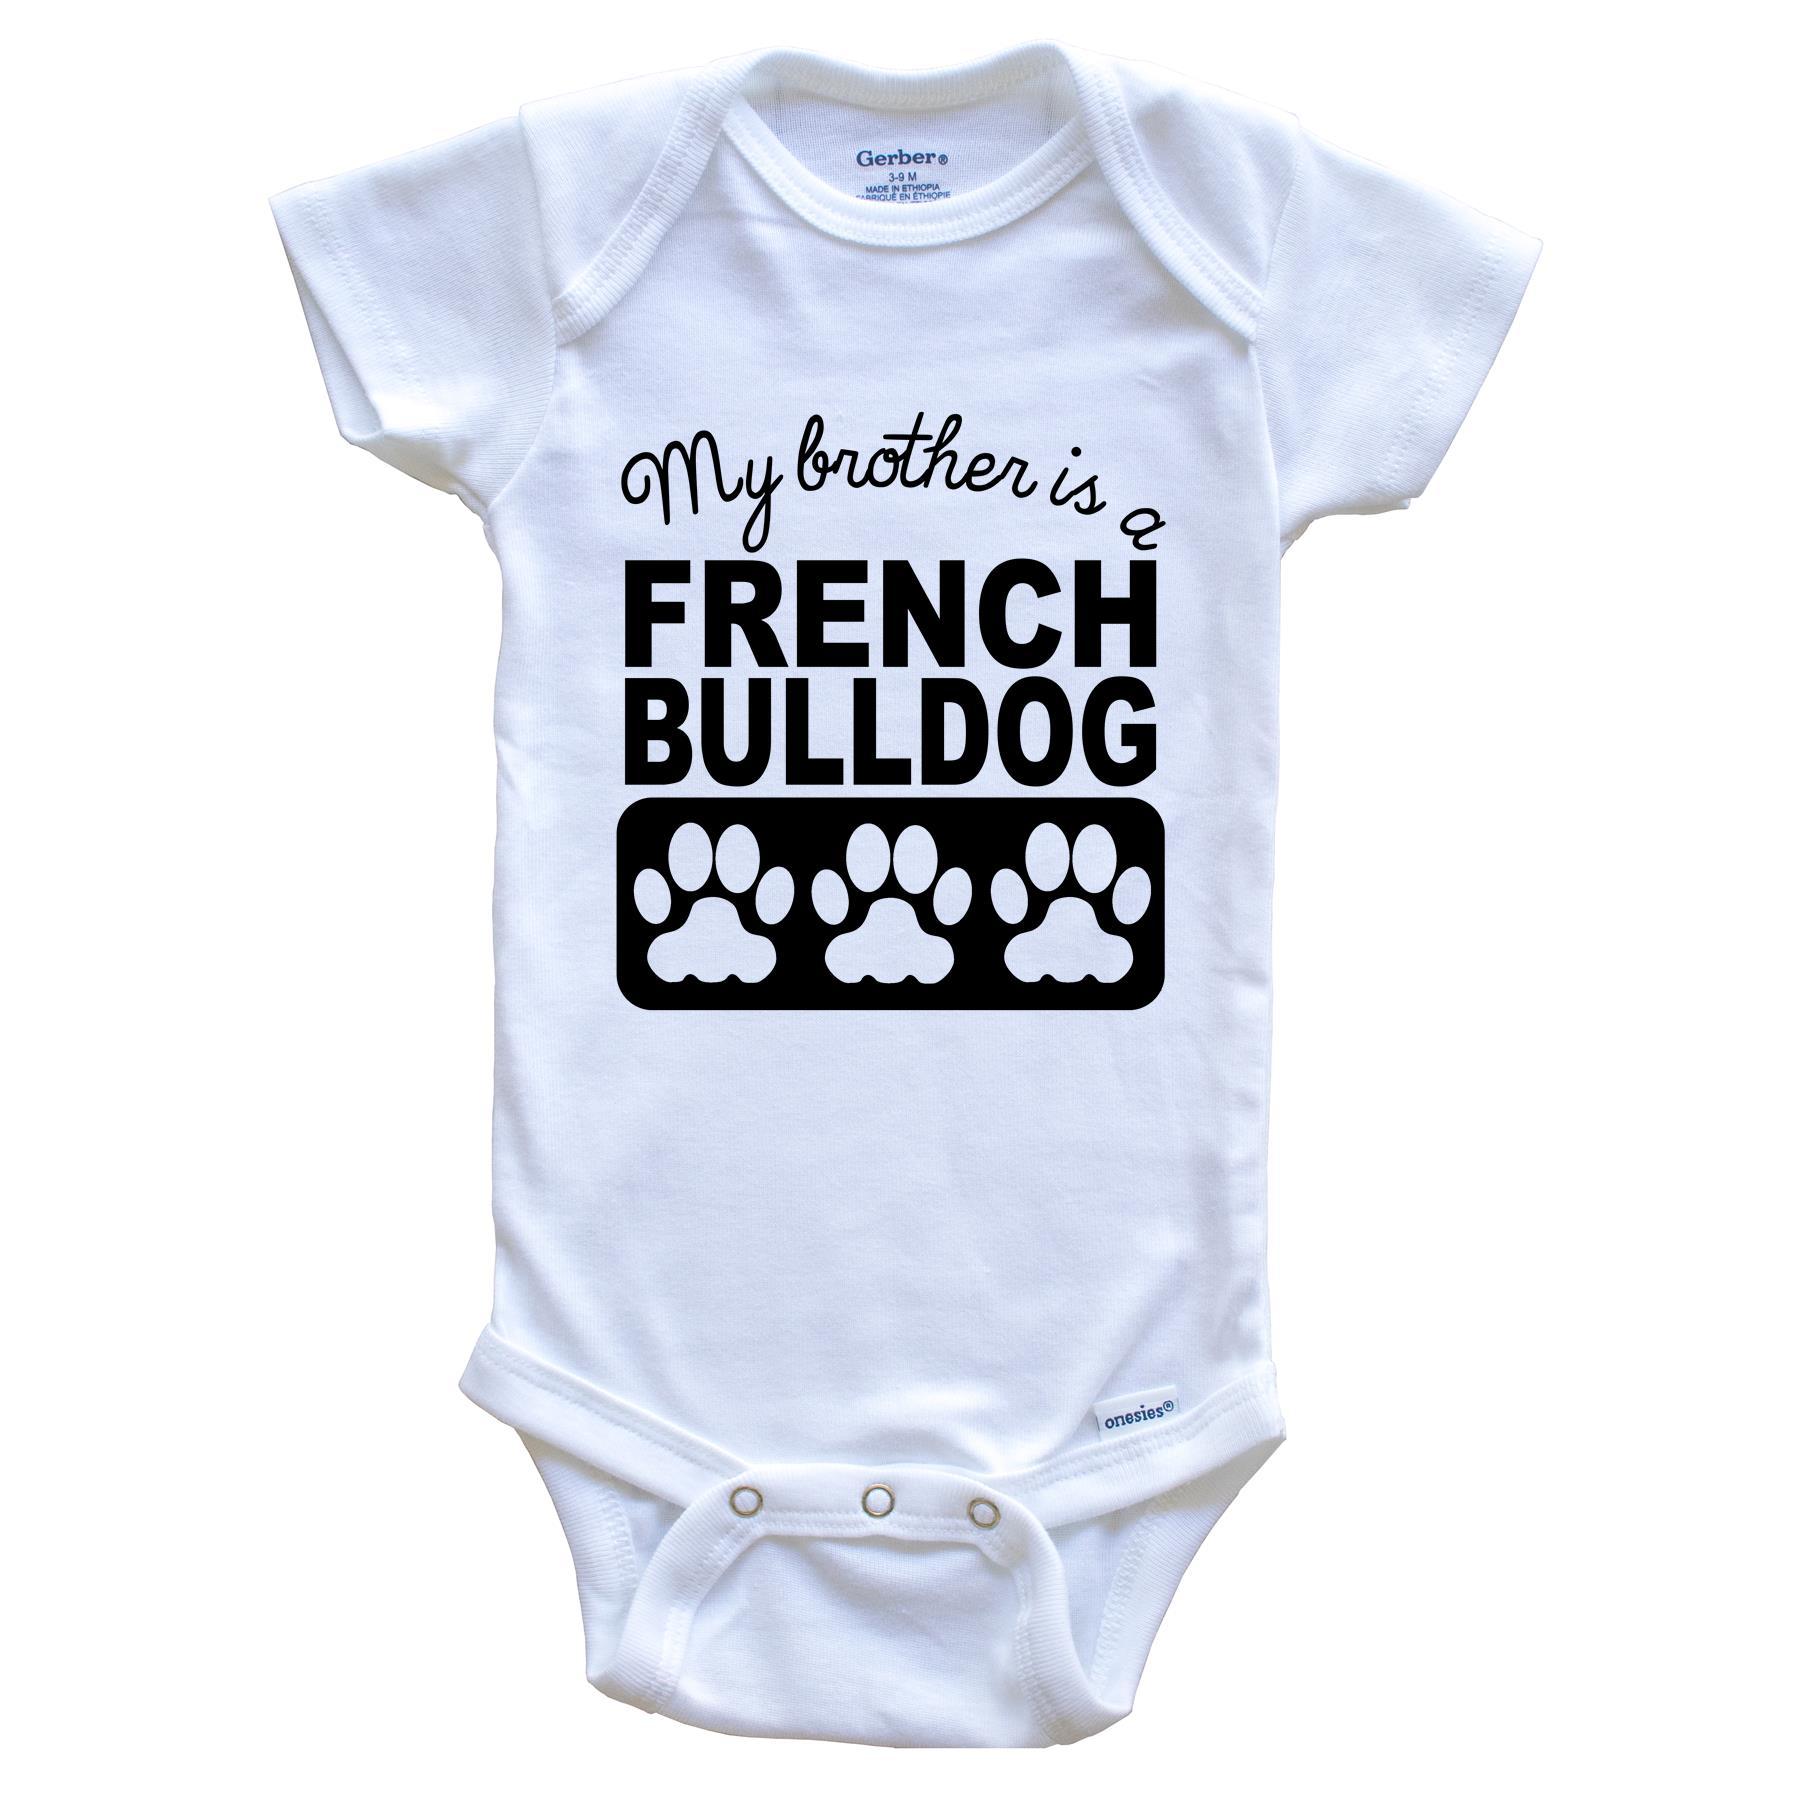 My Brother Is A French Bulldog Baby Onesie